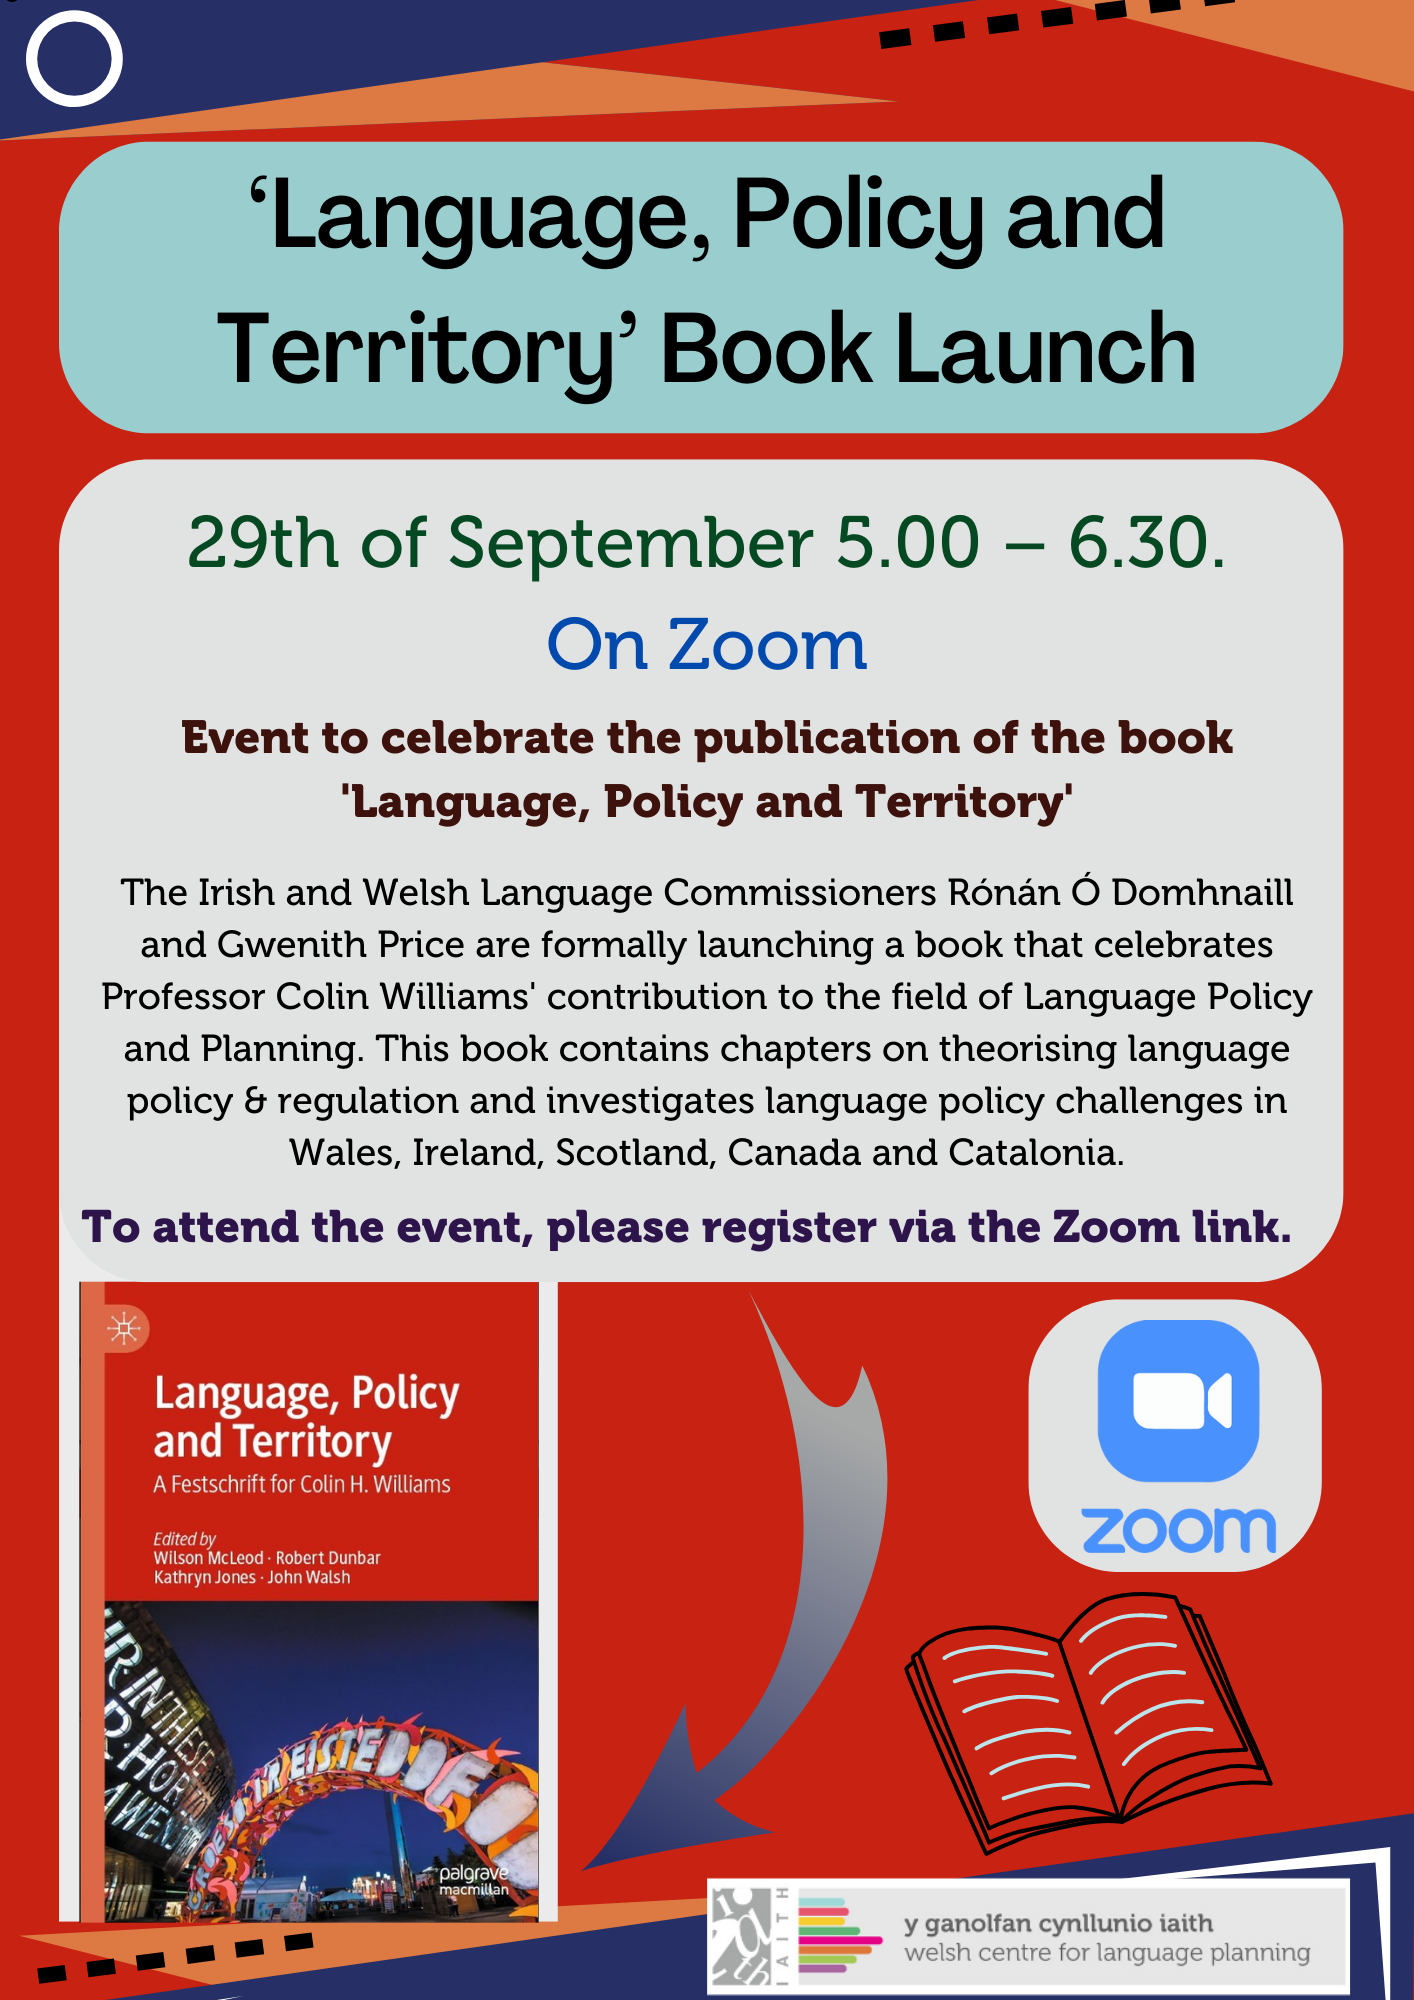 ‘Language, Policy and Territory’ Book Launch